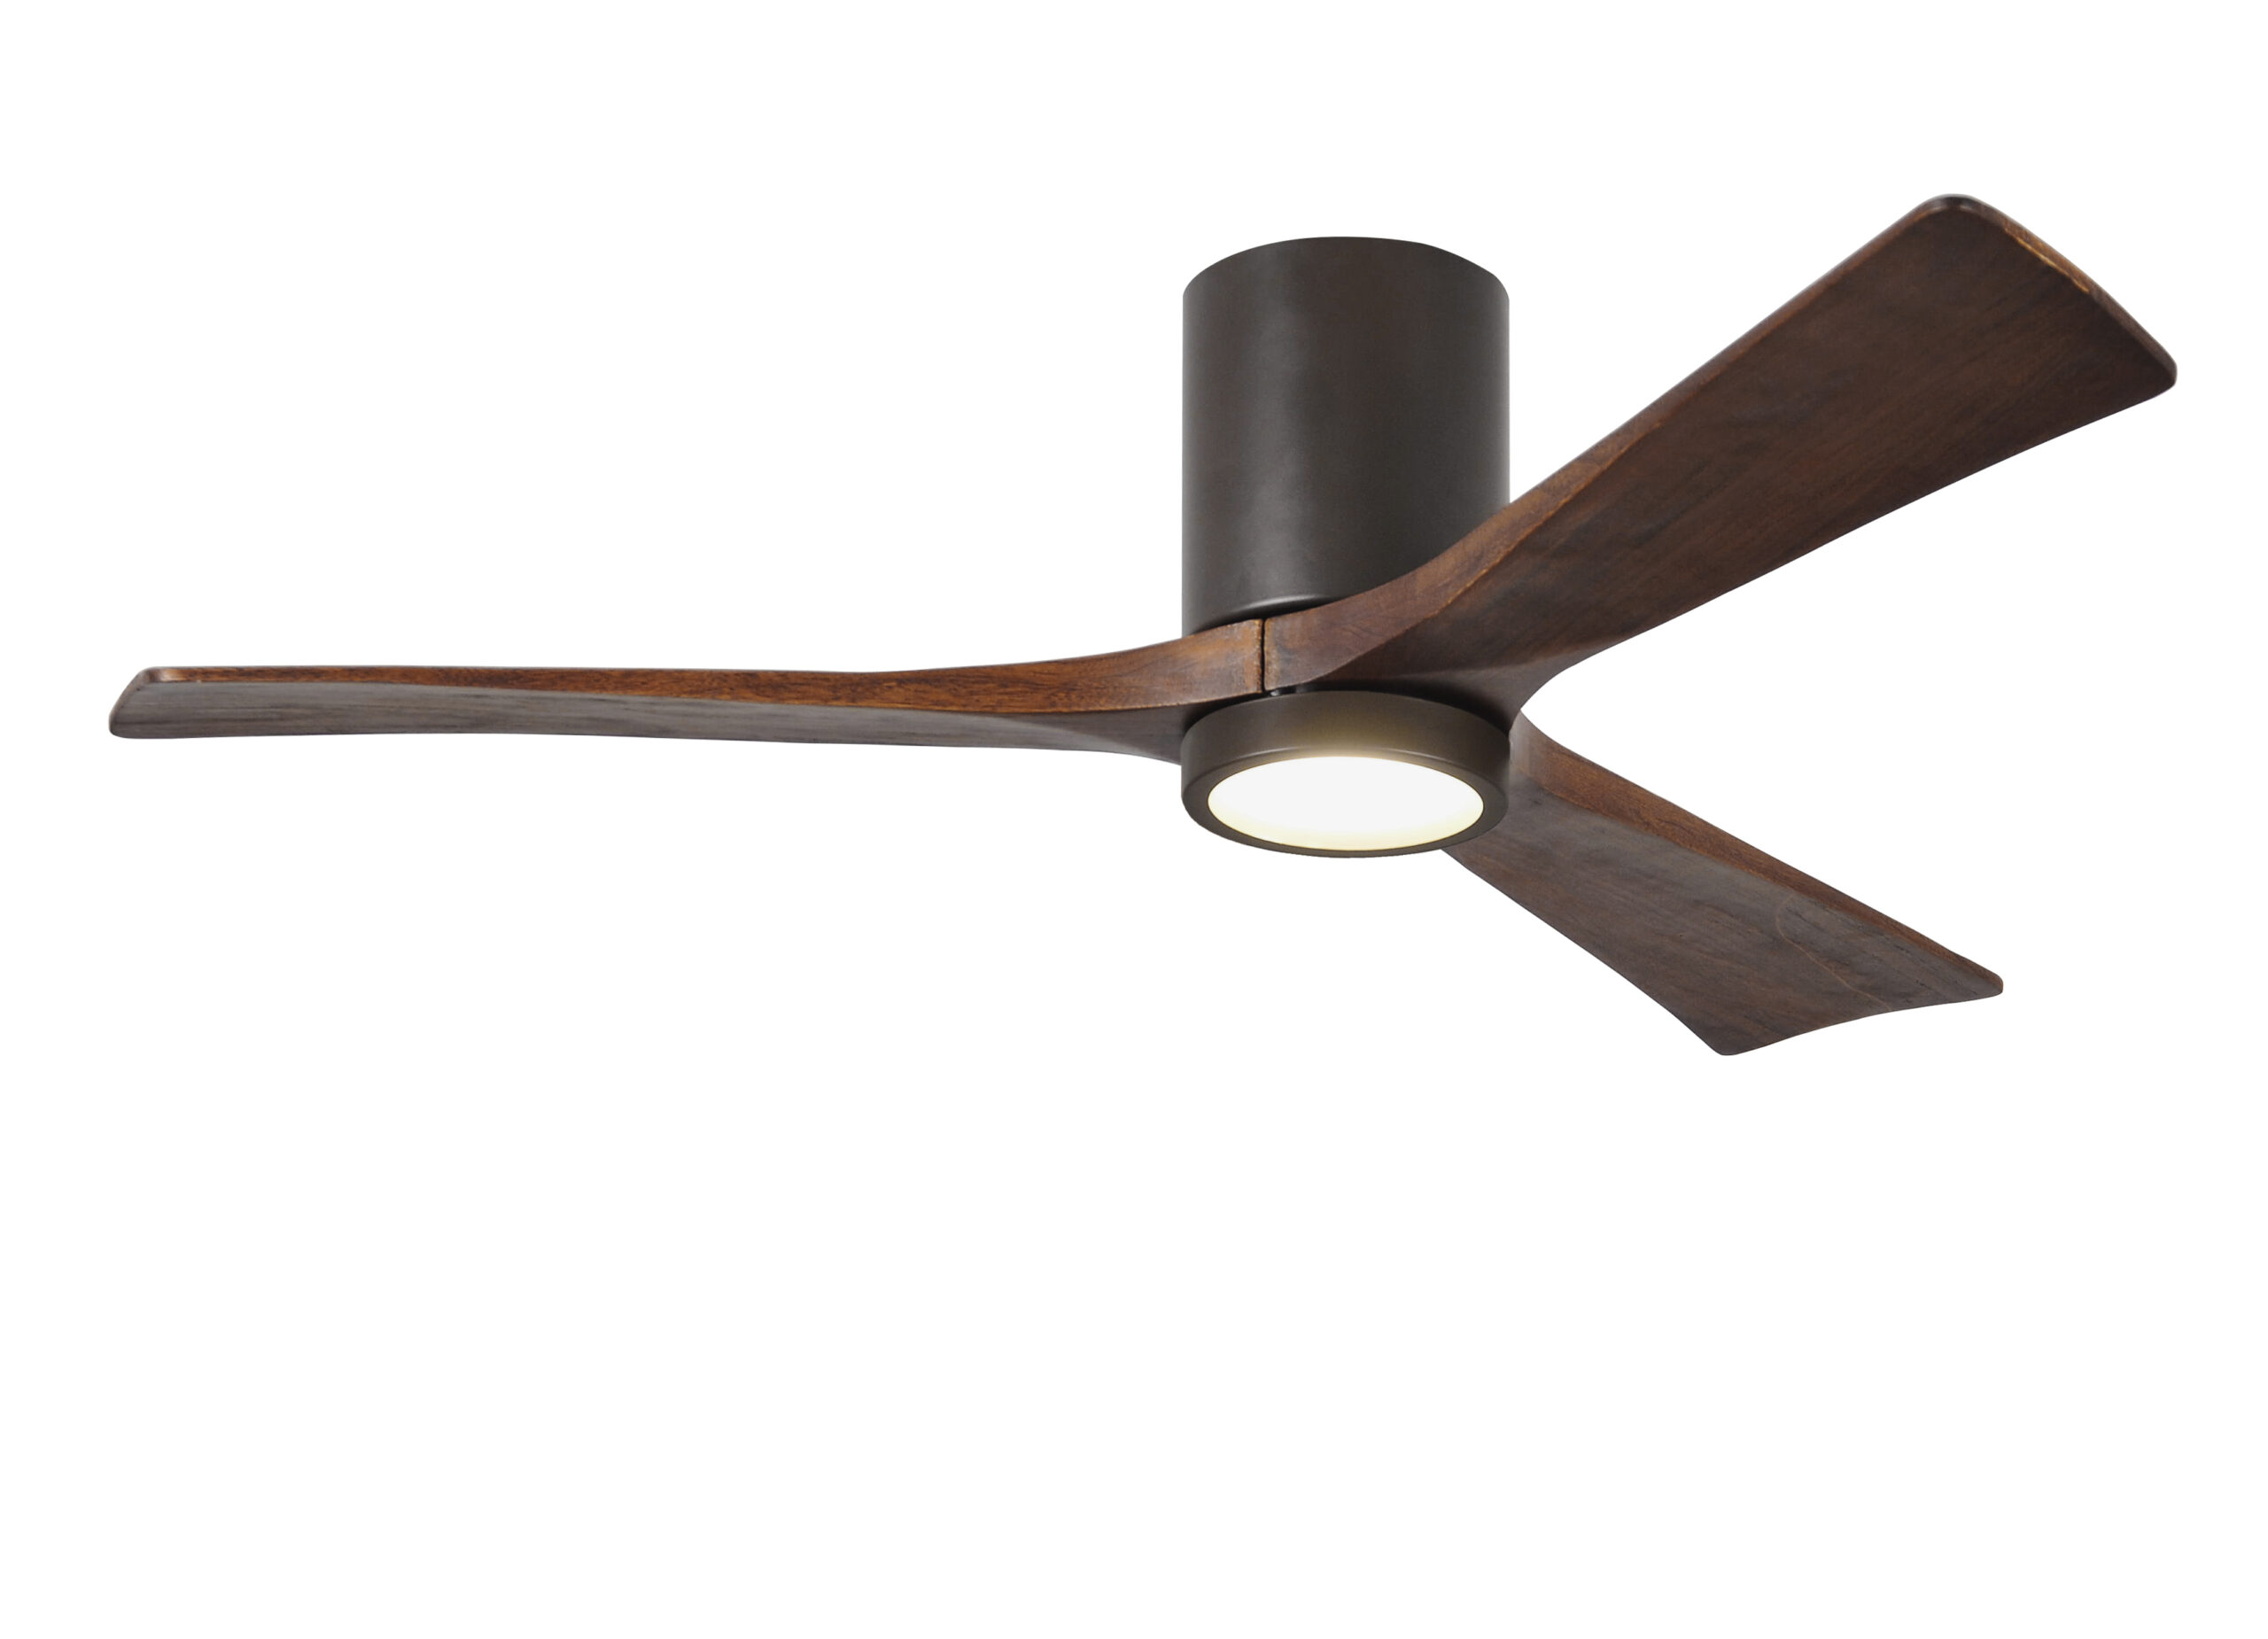 Irene-3HLK Ceiling Fan in Textured Bronze Finish with 52